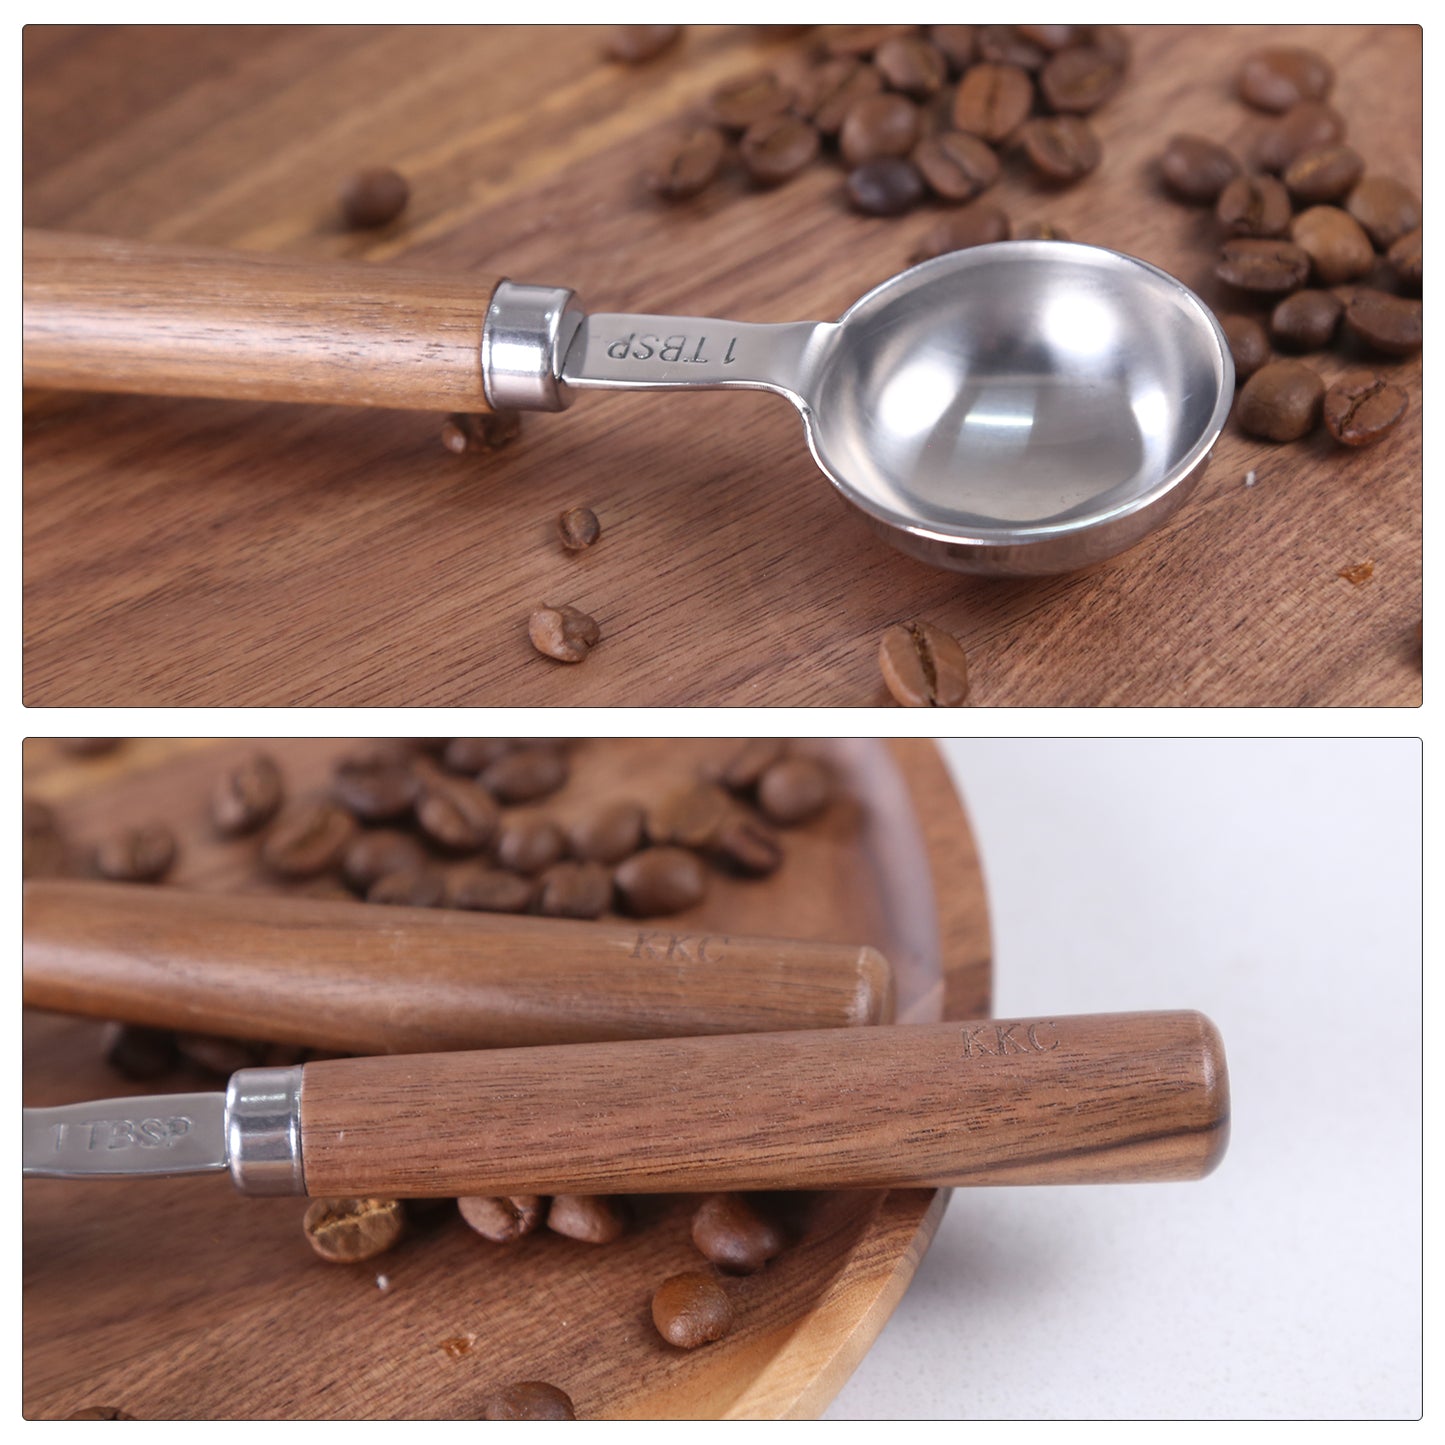 KKC, 2 Pcs Stainless Steel Coffee Spoons With Wood Handle 15ML Measuring Coffee Spoon For Coffee Beans Tea Suger, Silver (6.7")